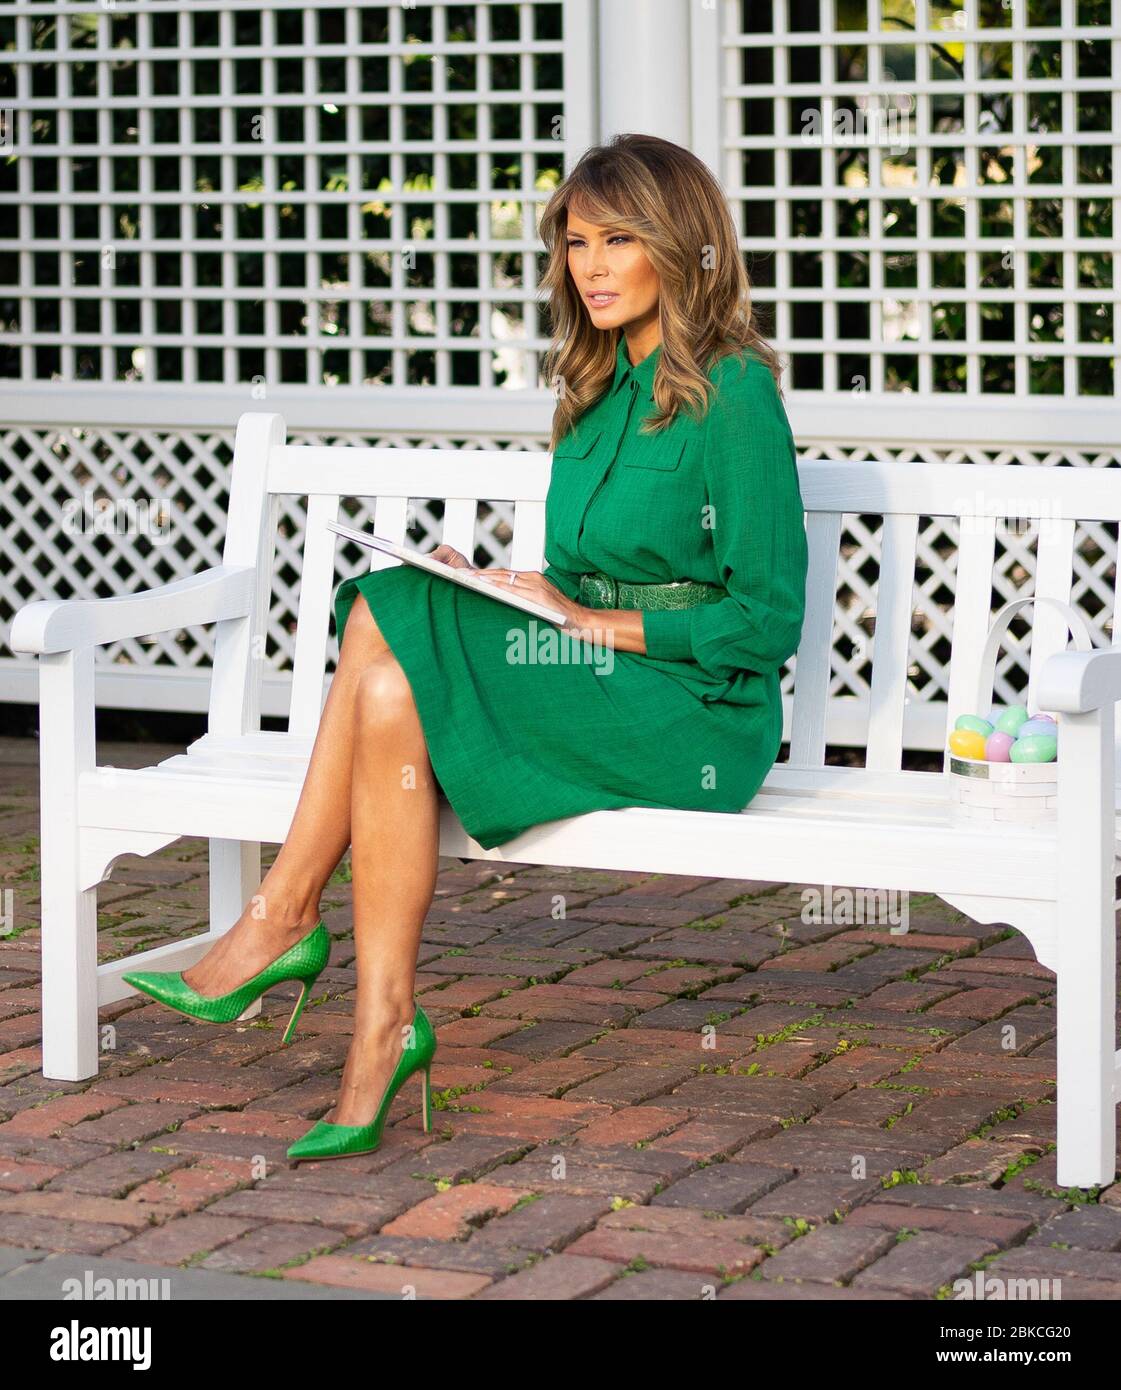 First Lady Melania Trump reads the book “The Little Rabbit” by Nicola Killen during a video recording to be shared online with children for Easter Wednesday, April 8, 2020, in the Kennedy Garden of the White House. First Lady Melania Trump Records a Reading of 'The Little Rabbit' for Easter Stock Photo